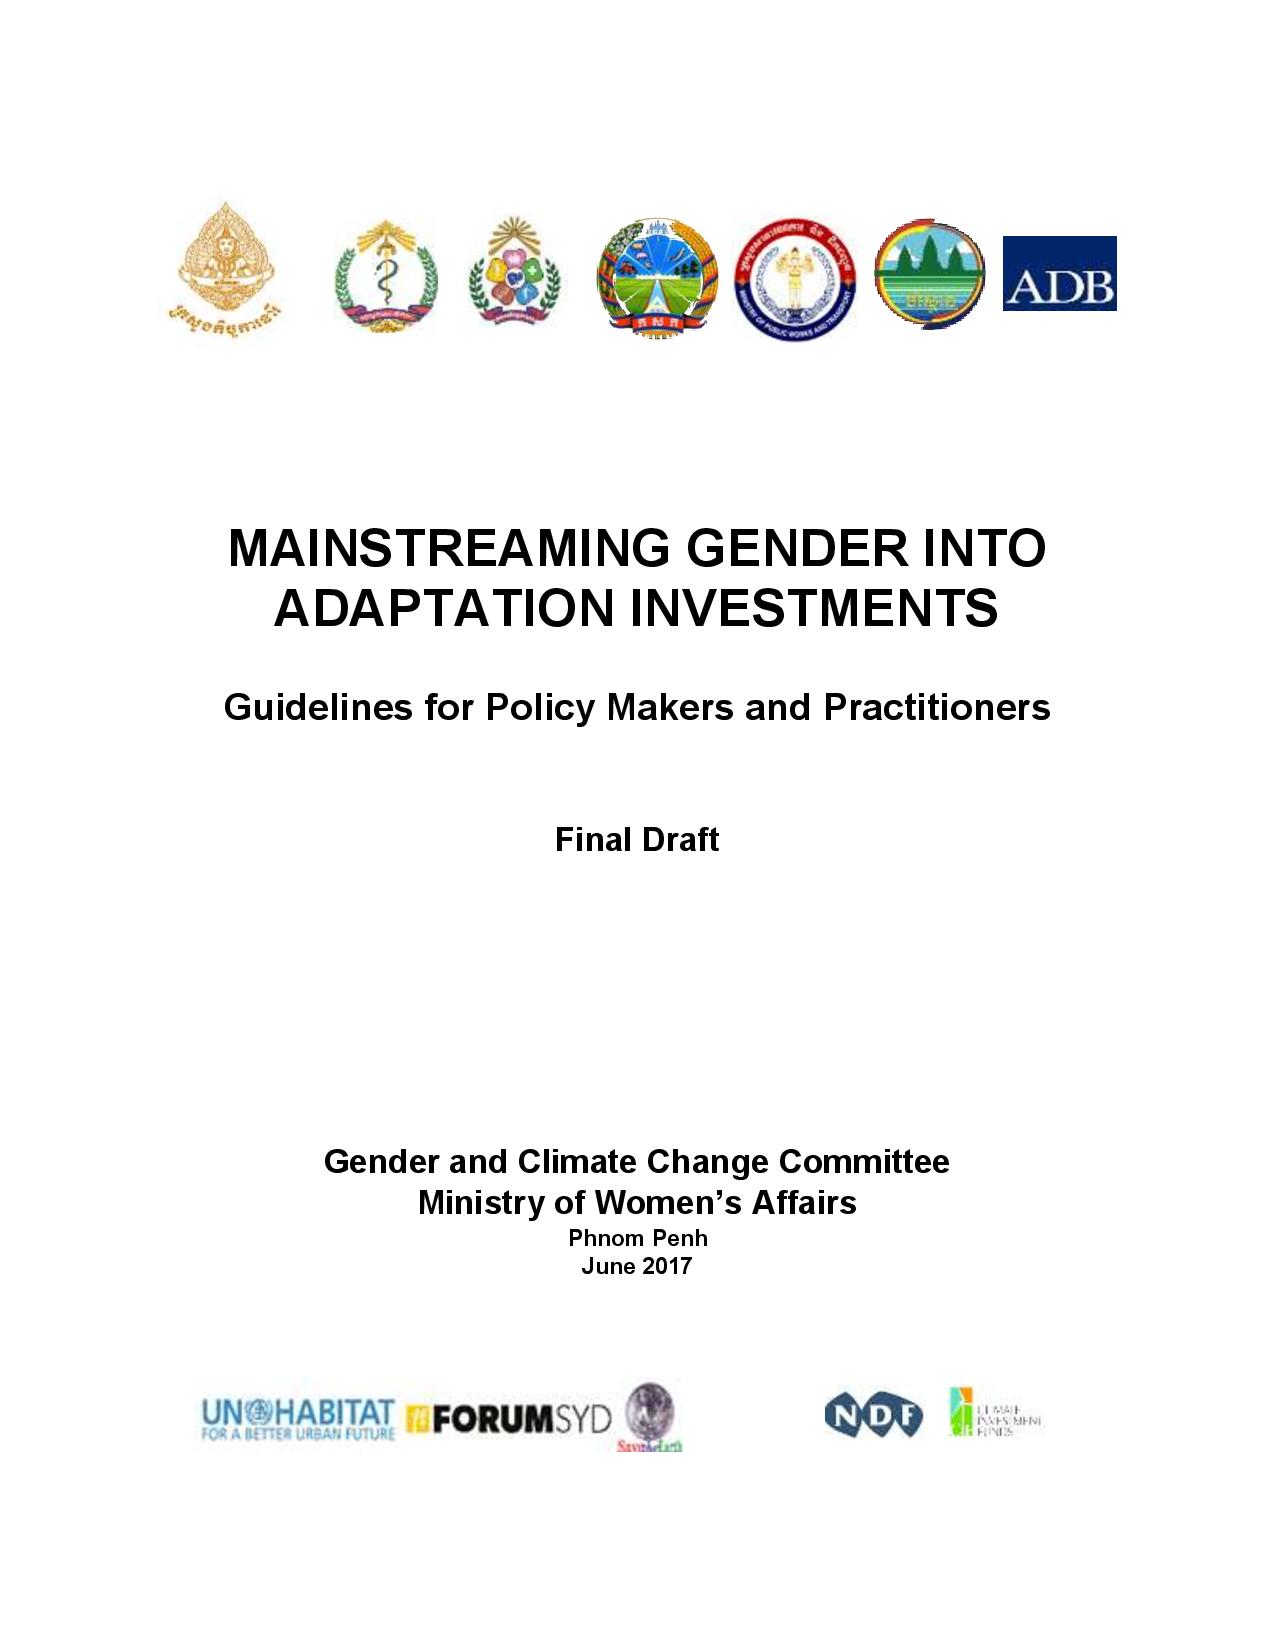 Mainstreaming Gender into Adaptation Investments